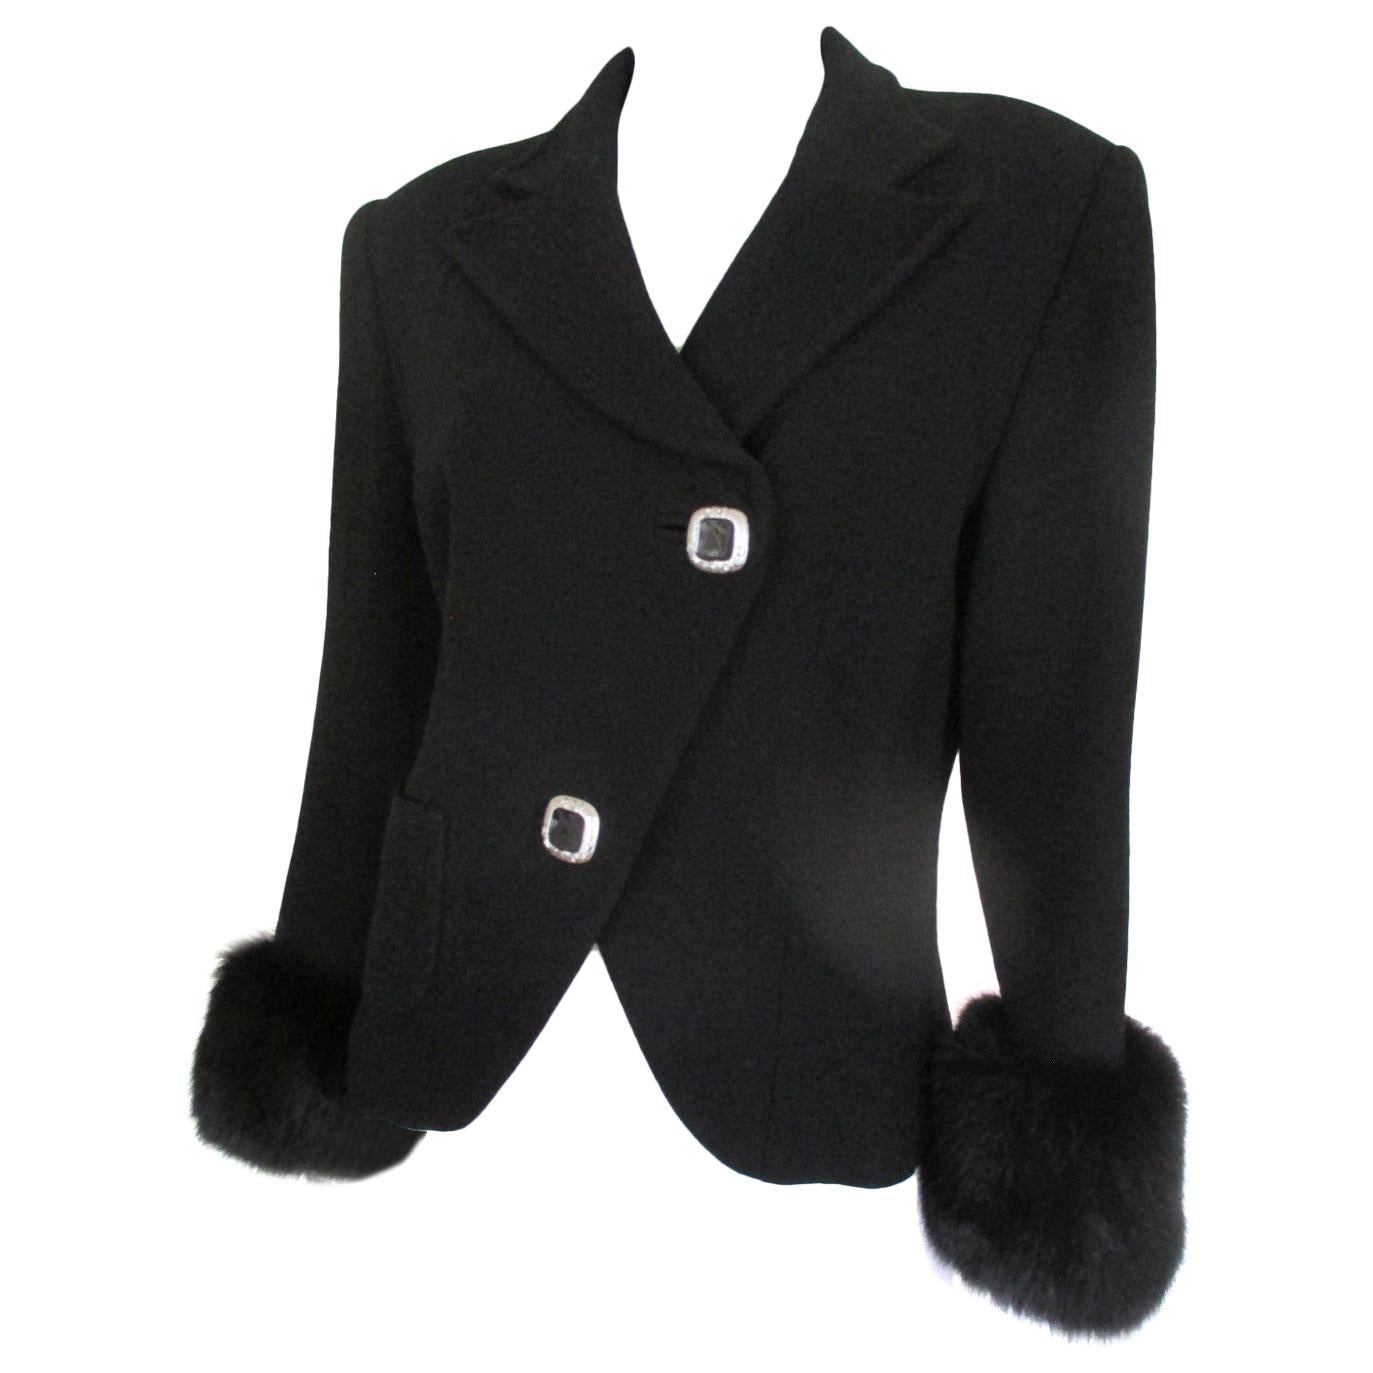 Gai Mattiolo couture black wool jacket trimmed with fox fur